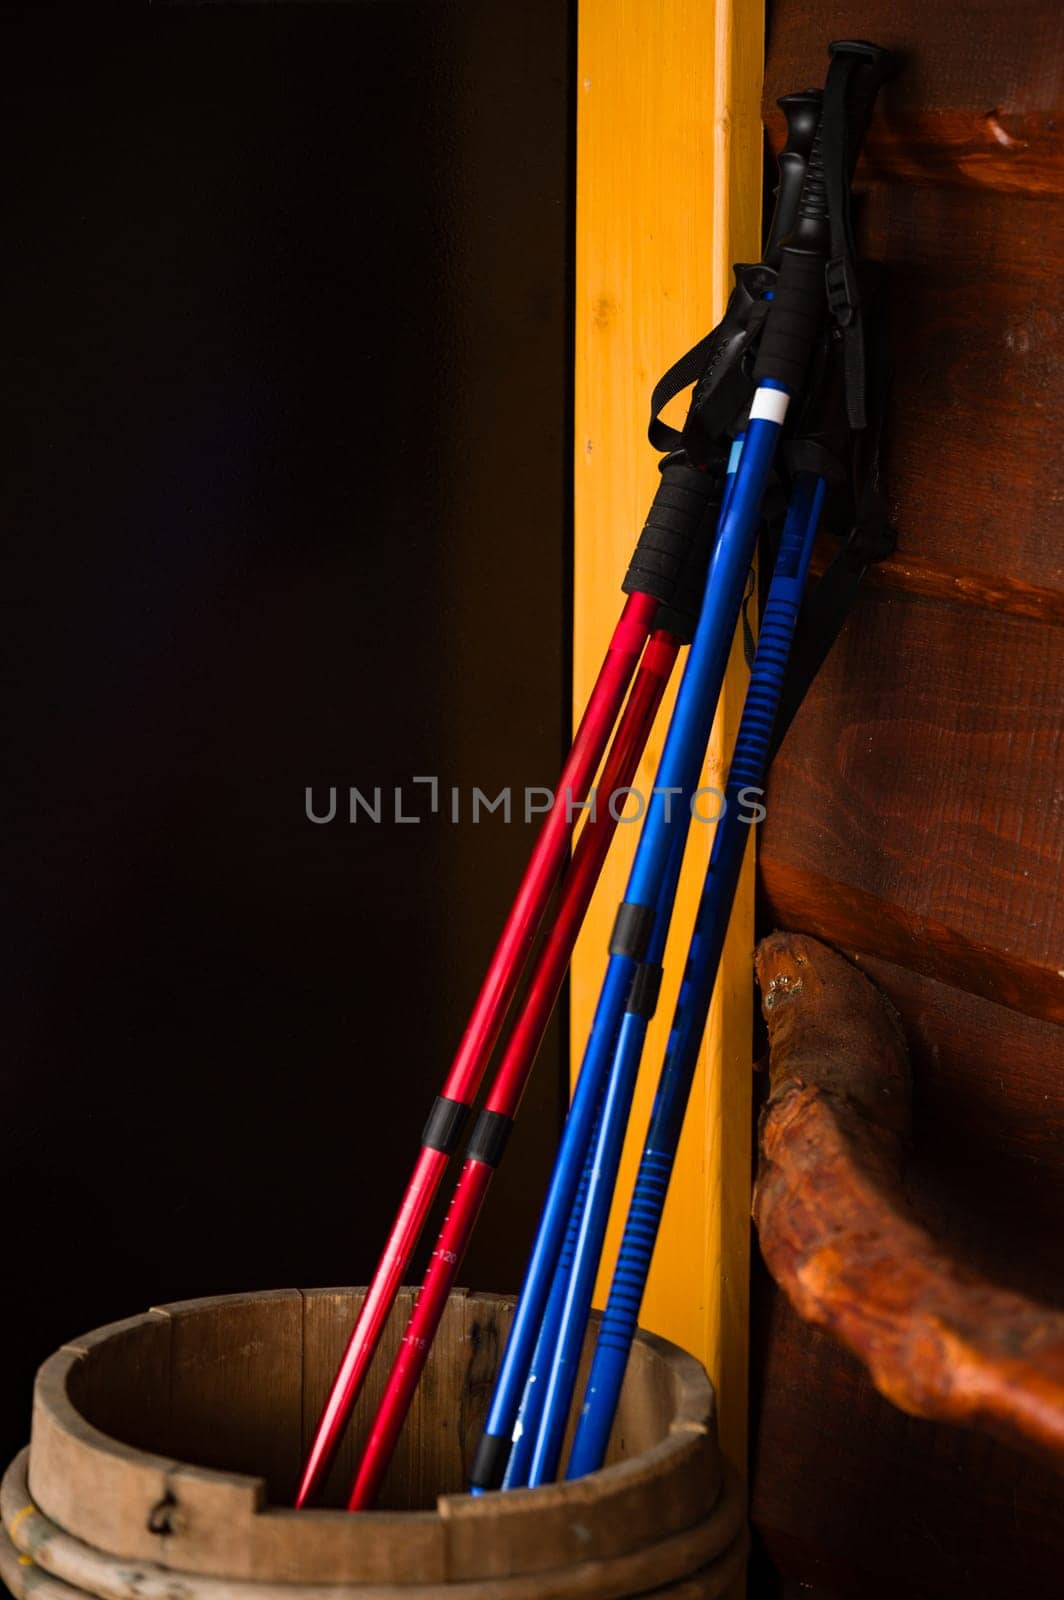 Three pairs of trekking poles are propped up in a barrel. by Niko_Cingaryuk